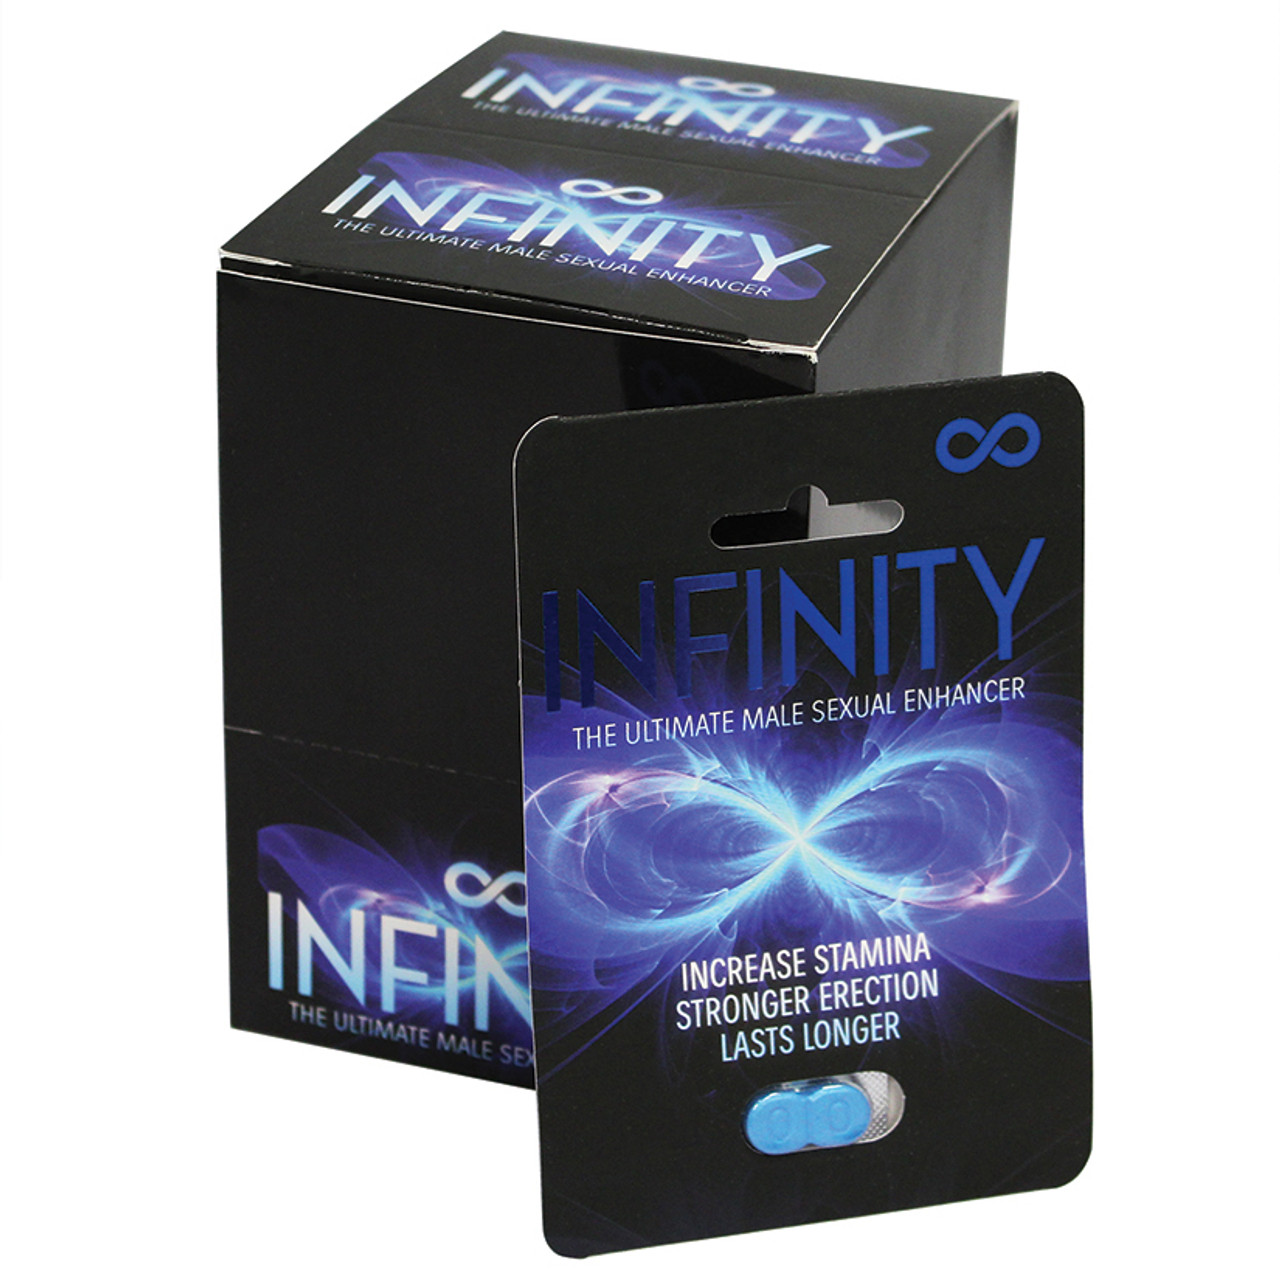 Infinty Male Enhancement Single Pack Display of 30 pic